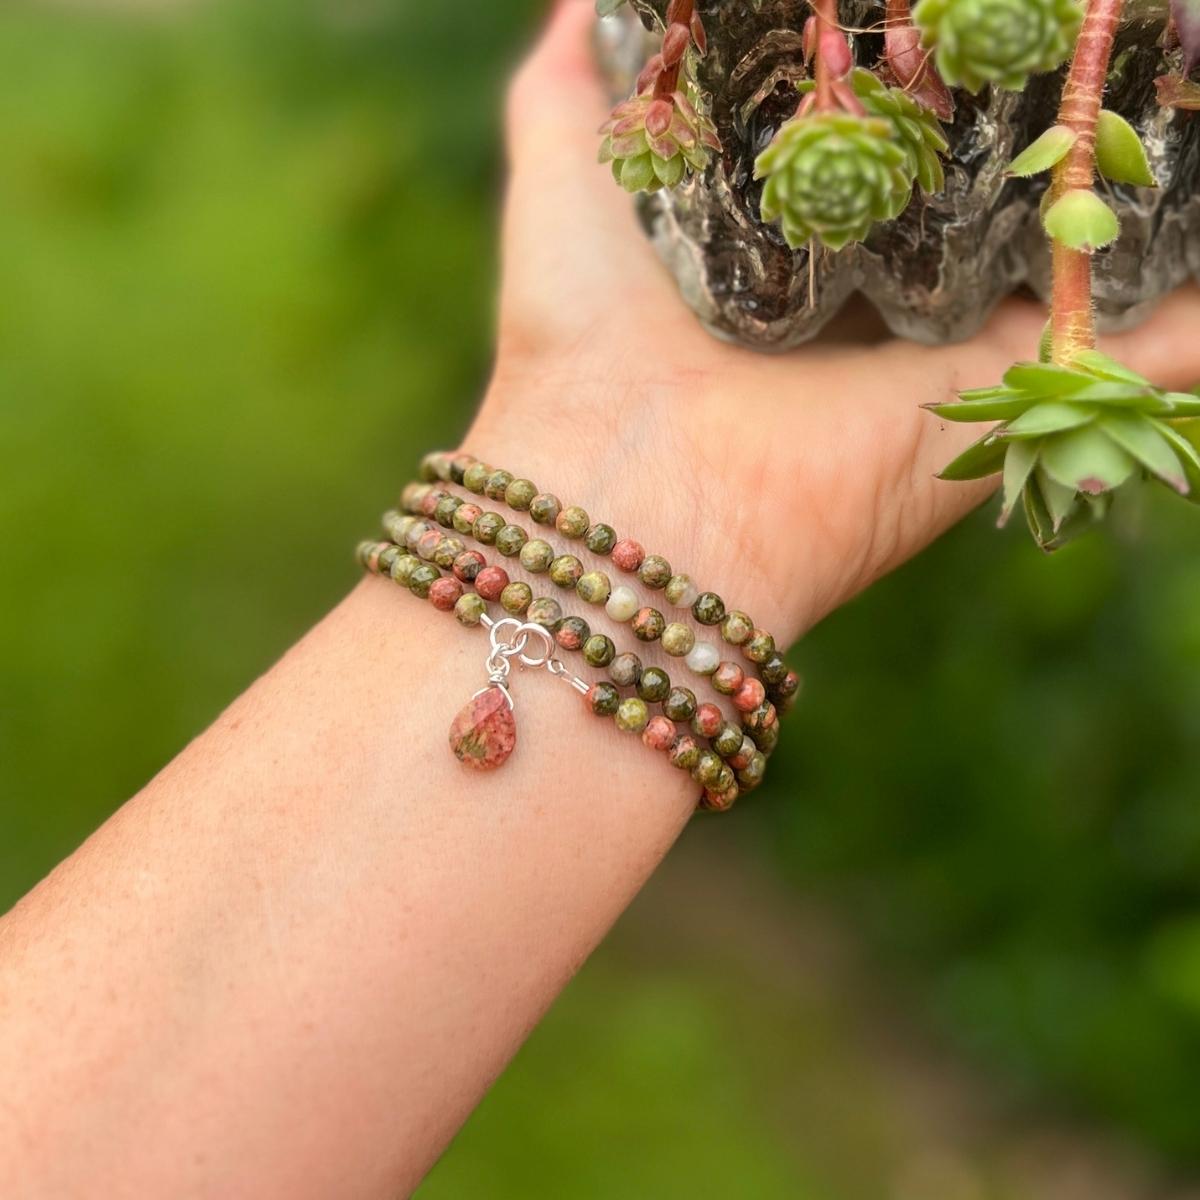 Experience the harmonious connections and deep healing energies of our Unakite Harmony Wrap Bracelet. Crafted from the beautiful Unakite gemstone, this bracelet combines the soothing vitality of greens with the affection and empathy of pinks, creating a powerful fusion of energies.